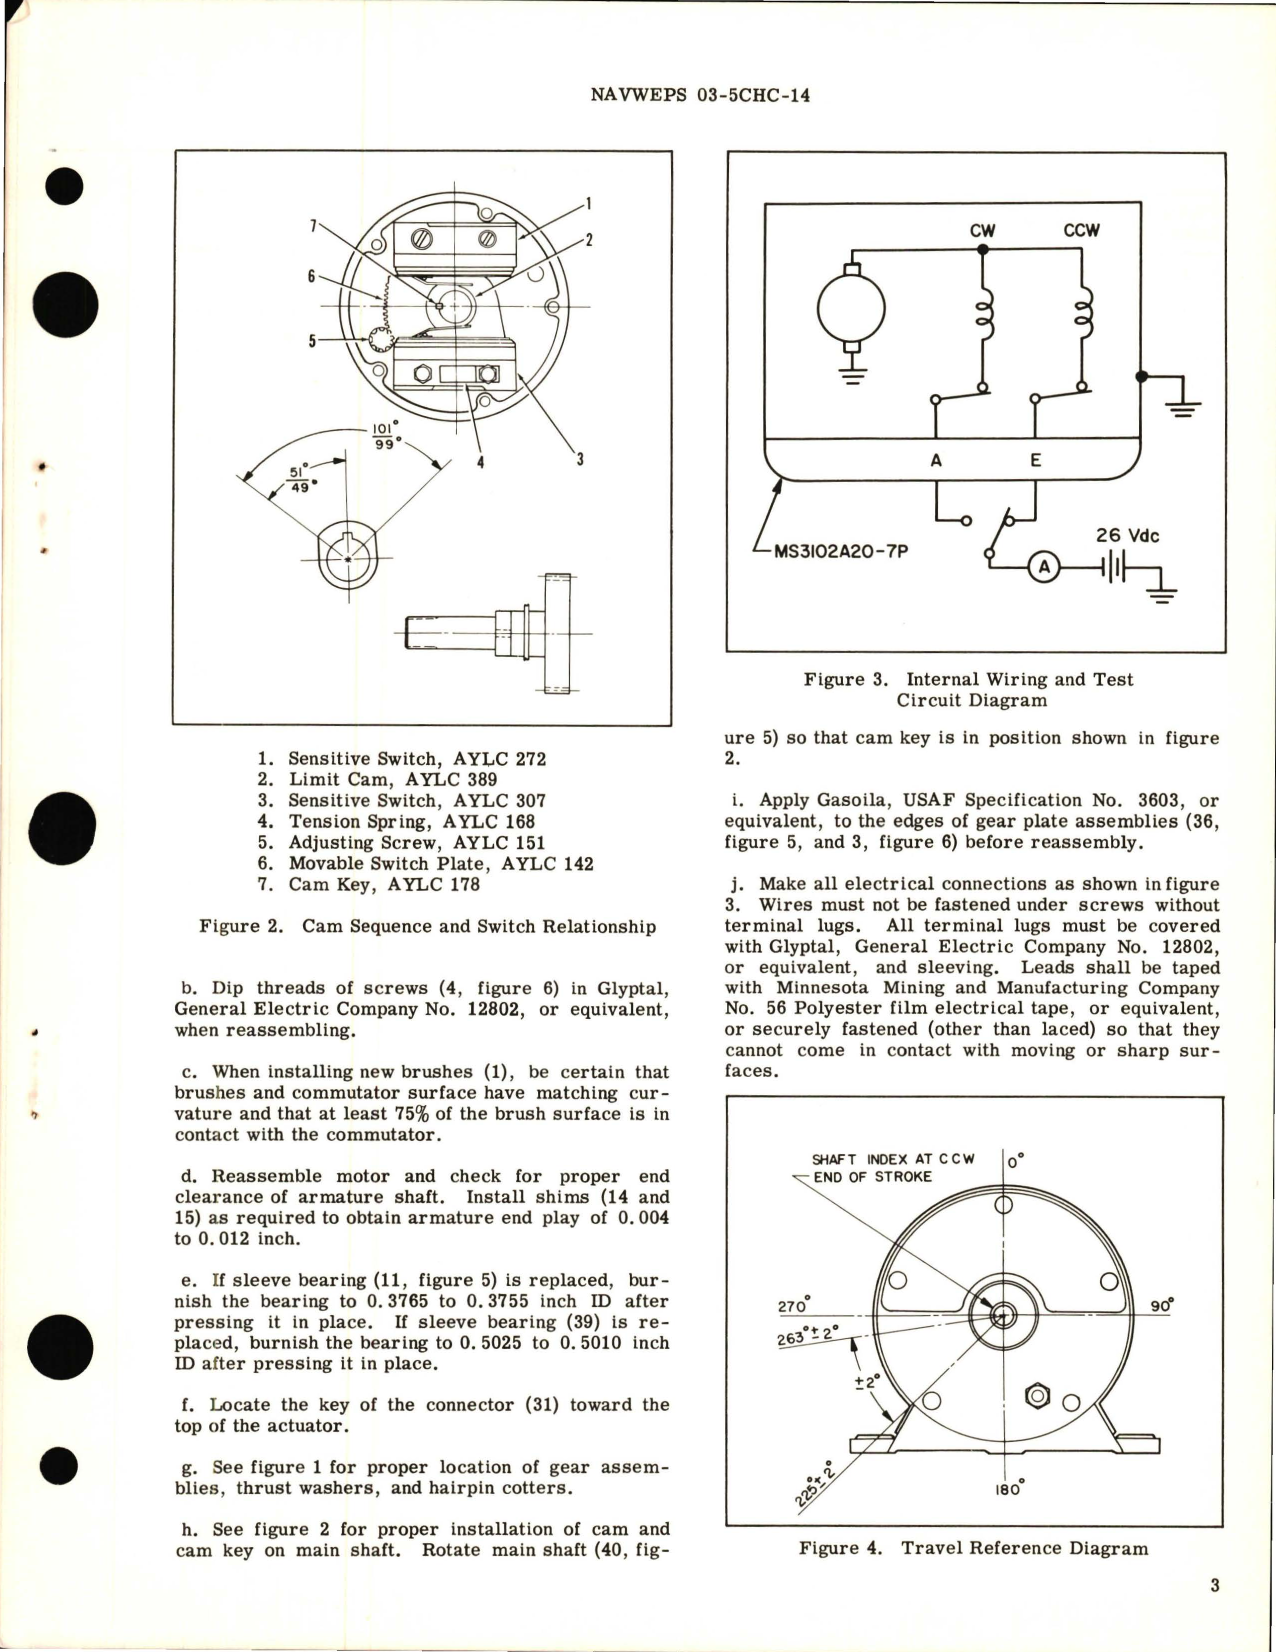 Sample page 5 from AirCorps Library document: Overhaul Instructions with Illustrated Parts Breakdown for Electromechanical Rotary Actuator - Part AYLC 3479 